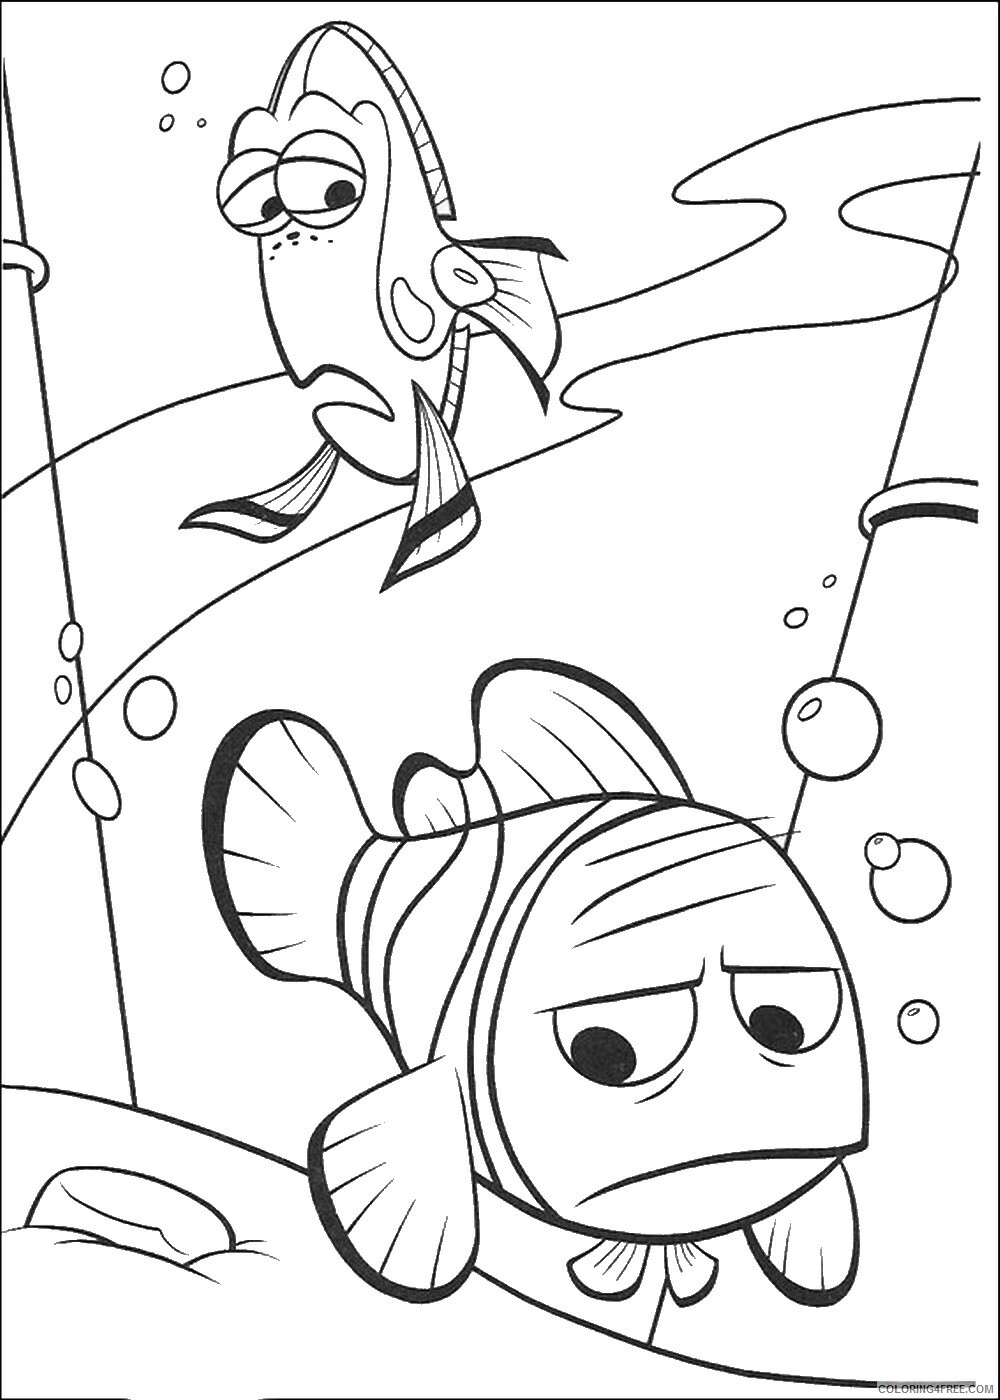 Finding Nemo Coloring Pages TV Film findingnemoc21 Printable 2020 02818 Coloring4free